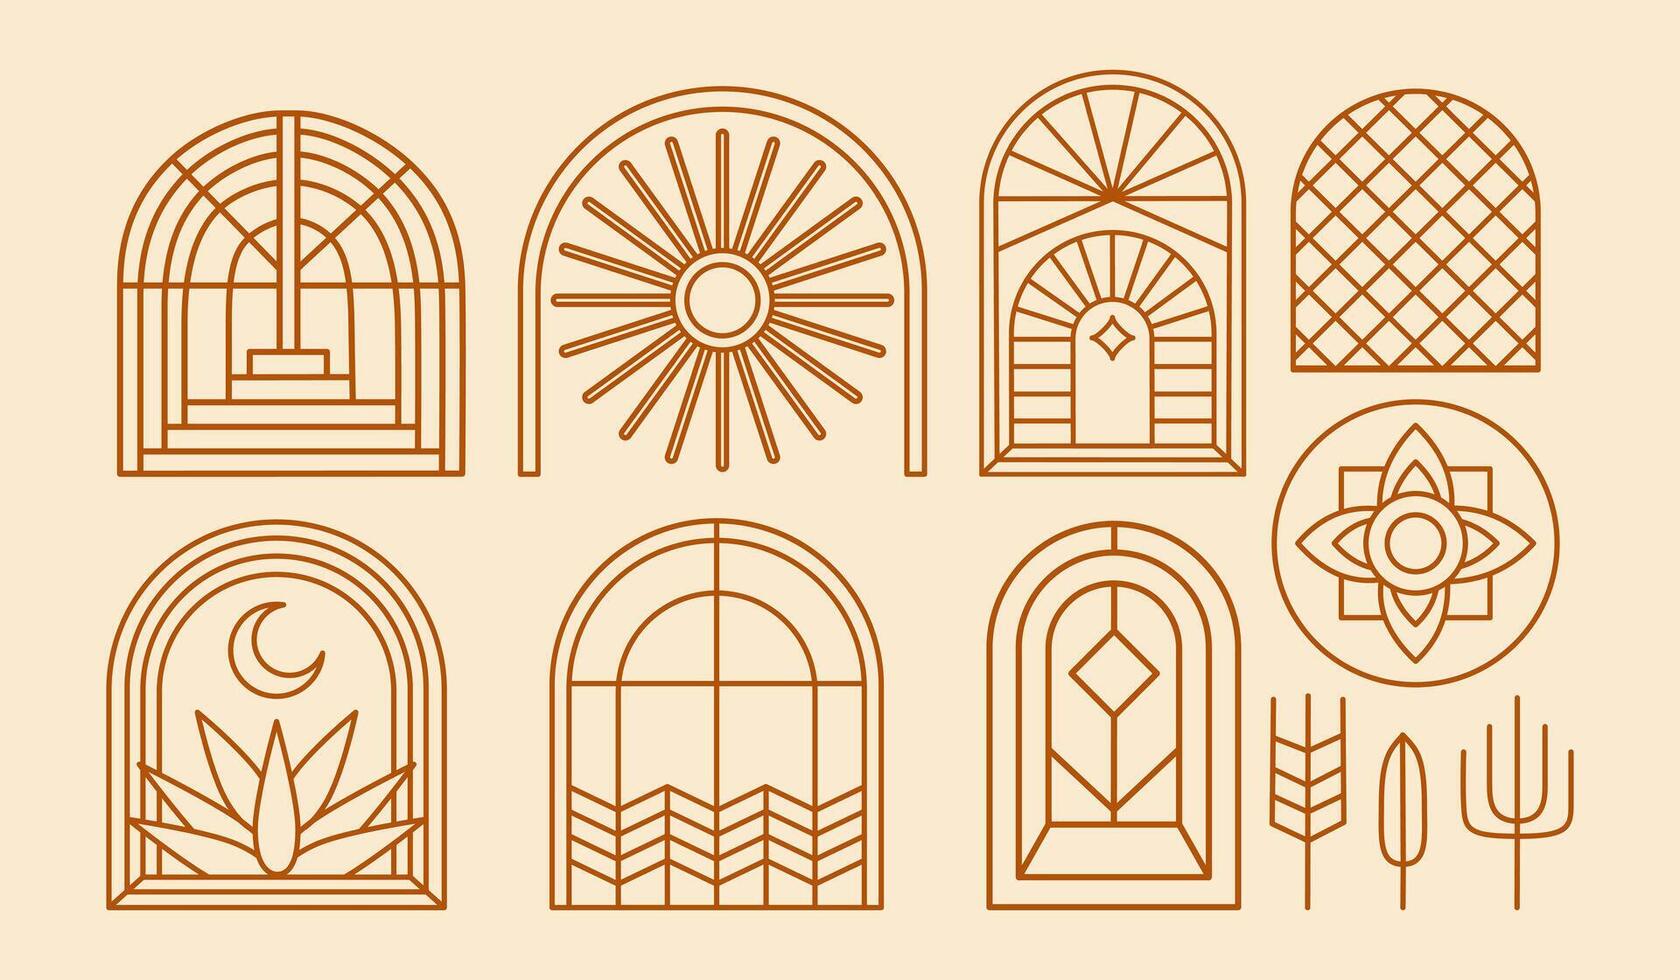 Bohemian windows and doors. Bohemian geometric signs and symbols. Linear arch, contour logo in boho style. Abstract design elements. Vector illustration.